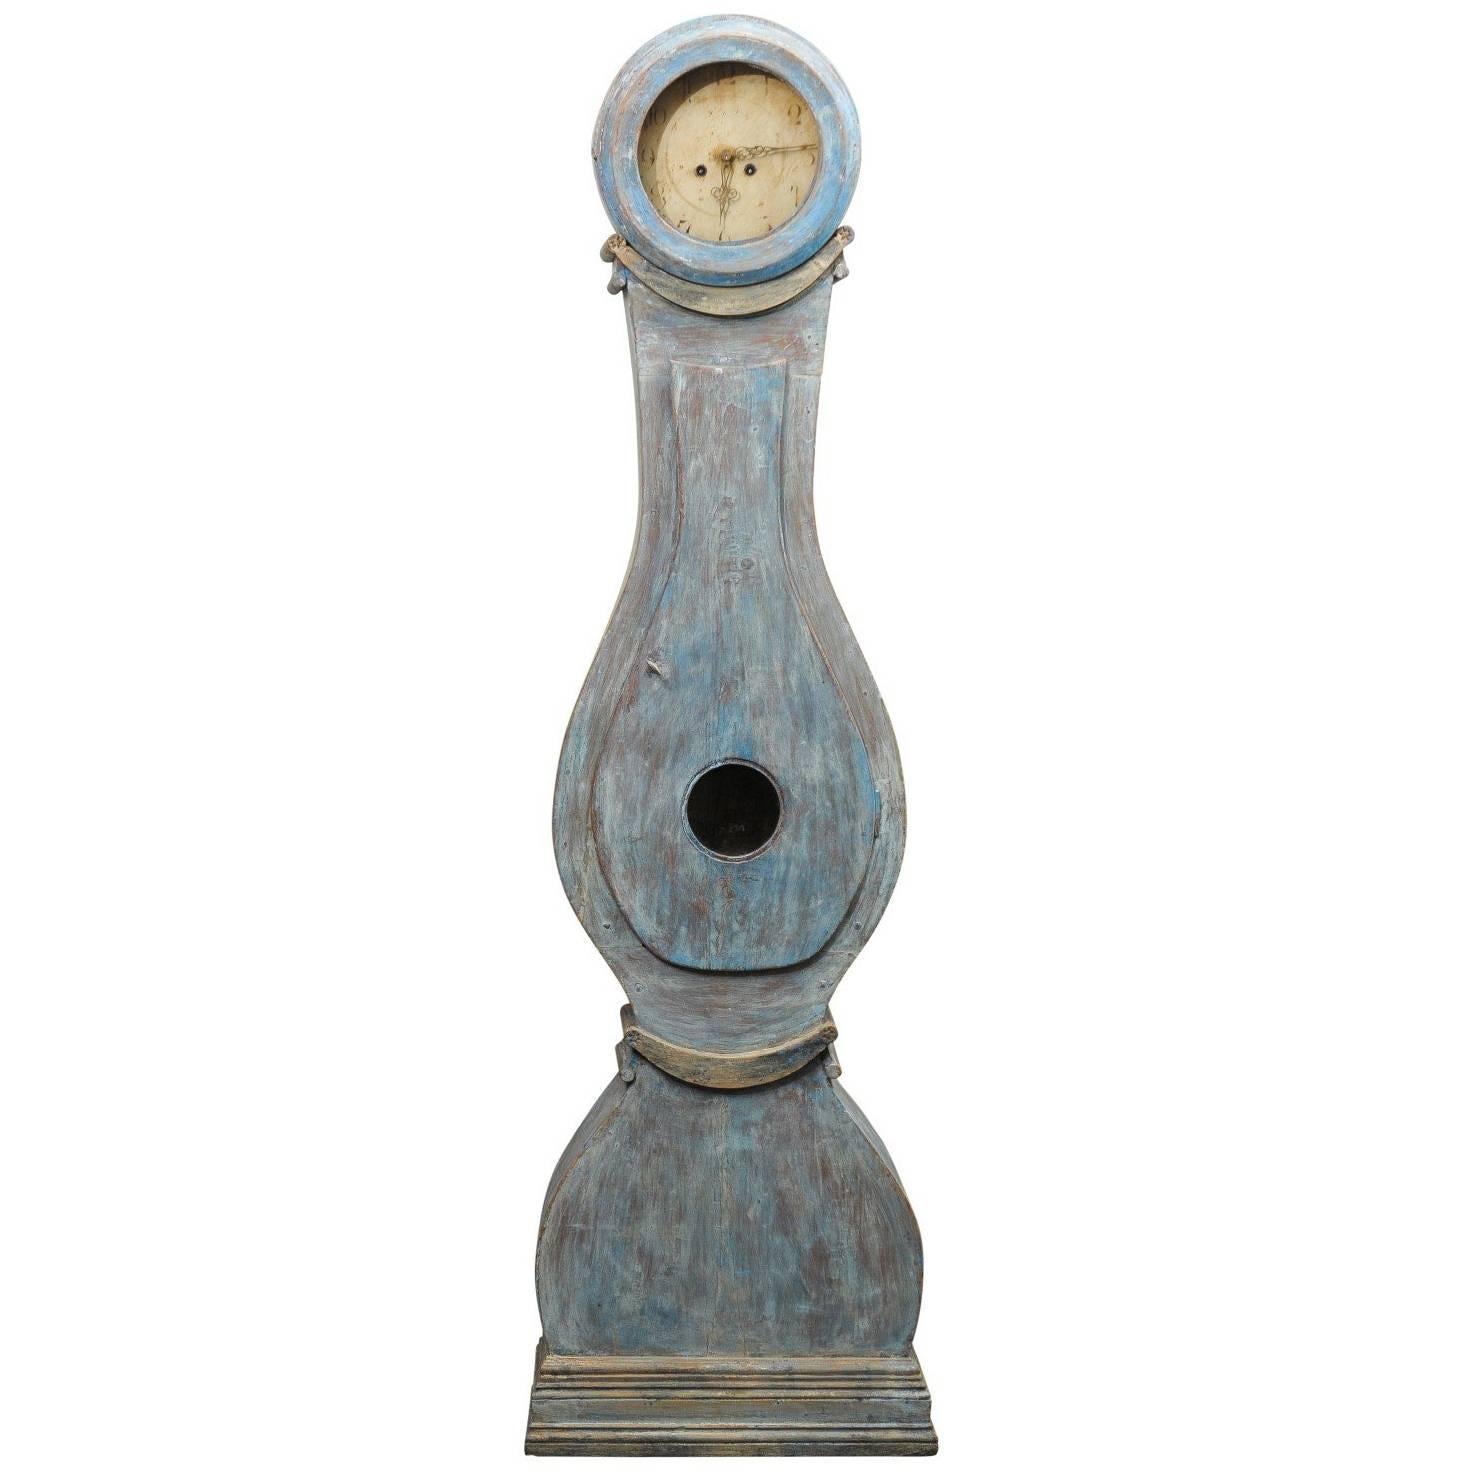 Swedish Painted Blue Wood Clock with Grey Undertones from the 19th Century